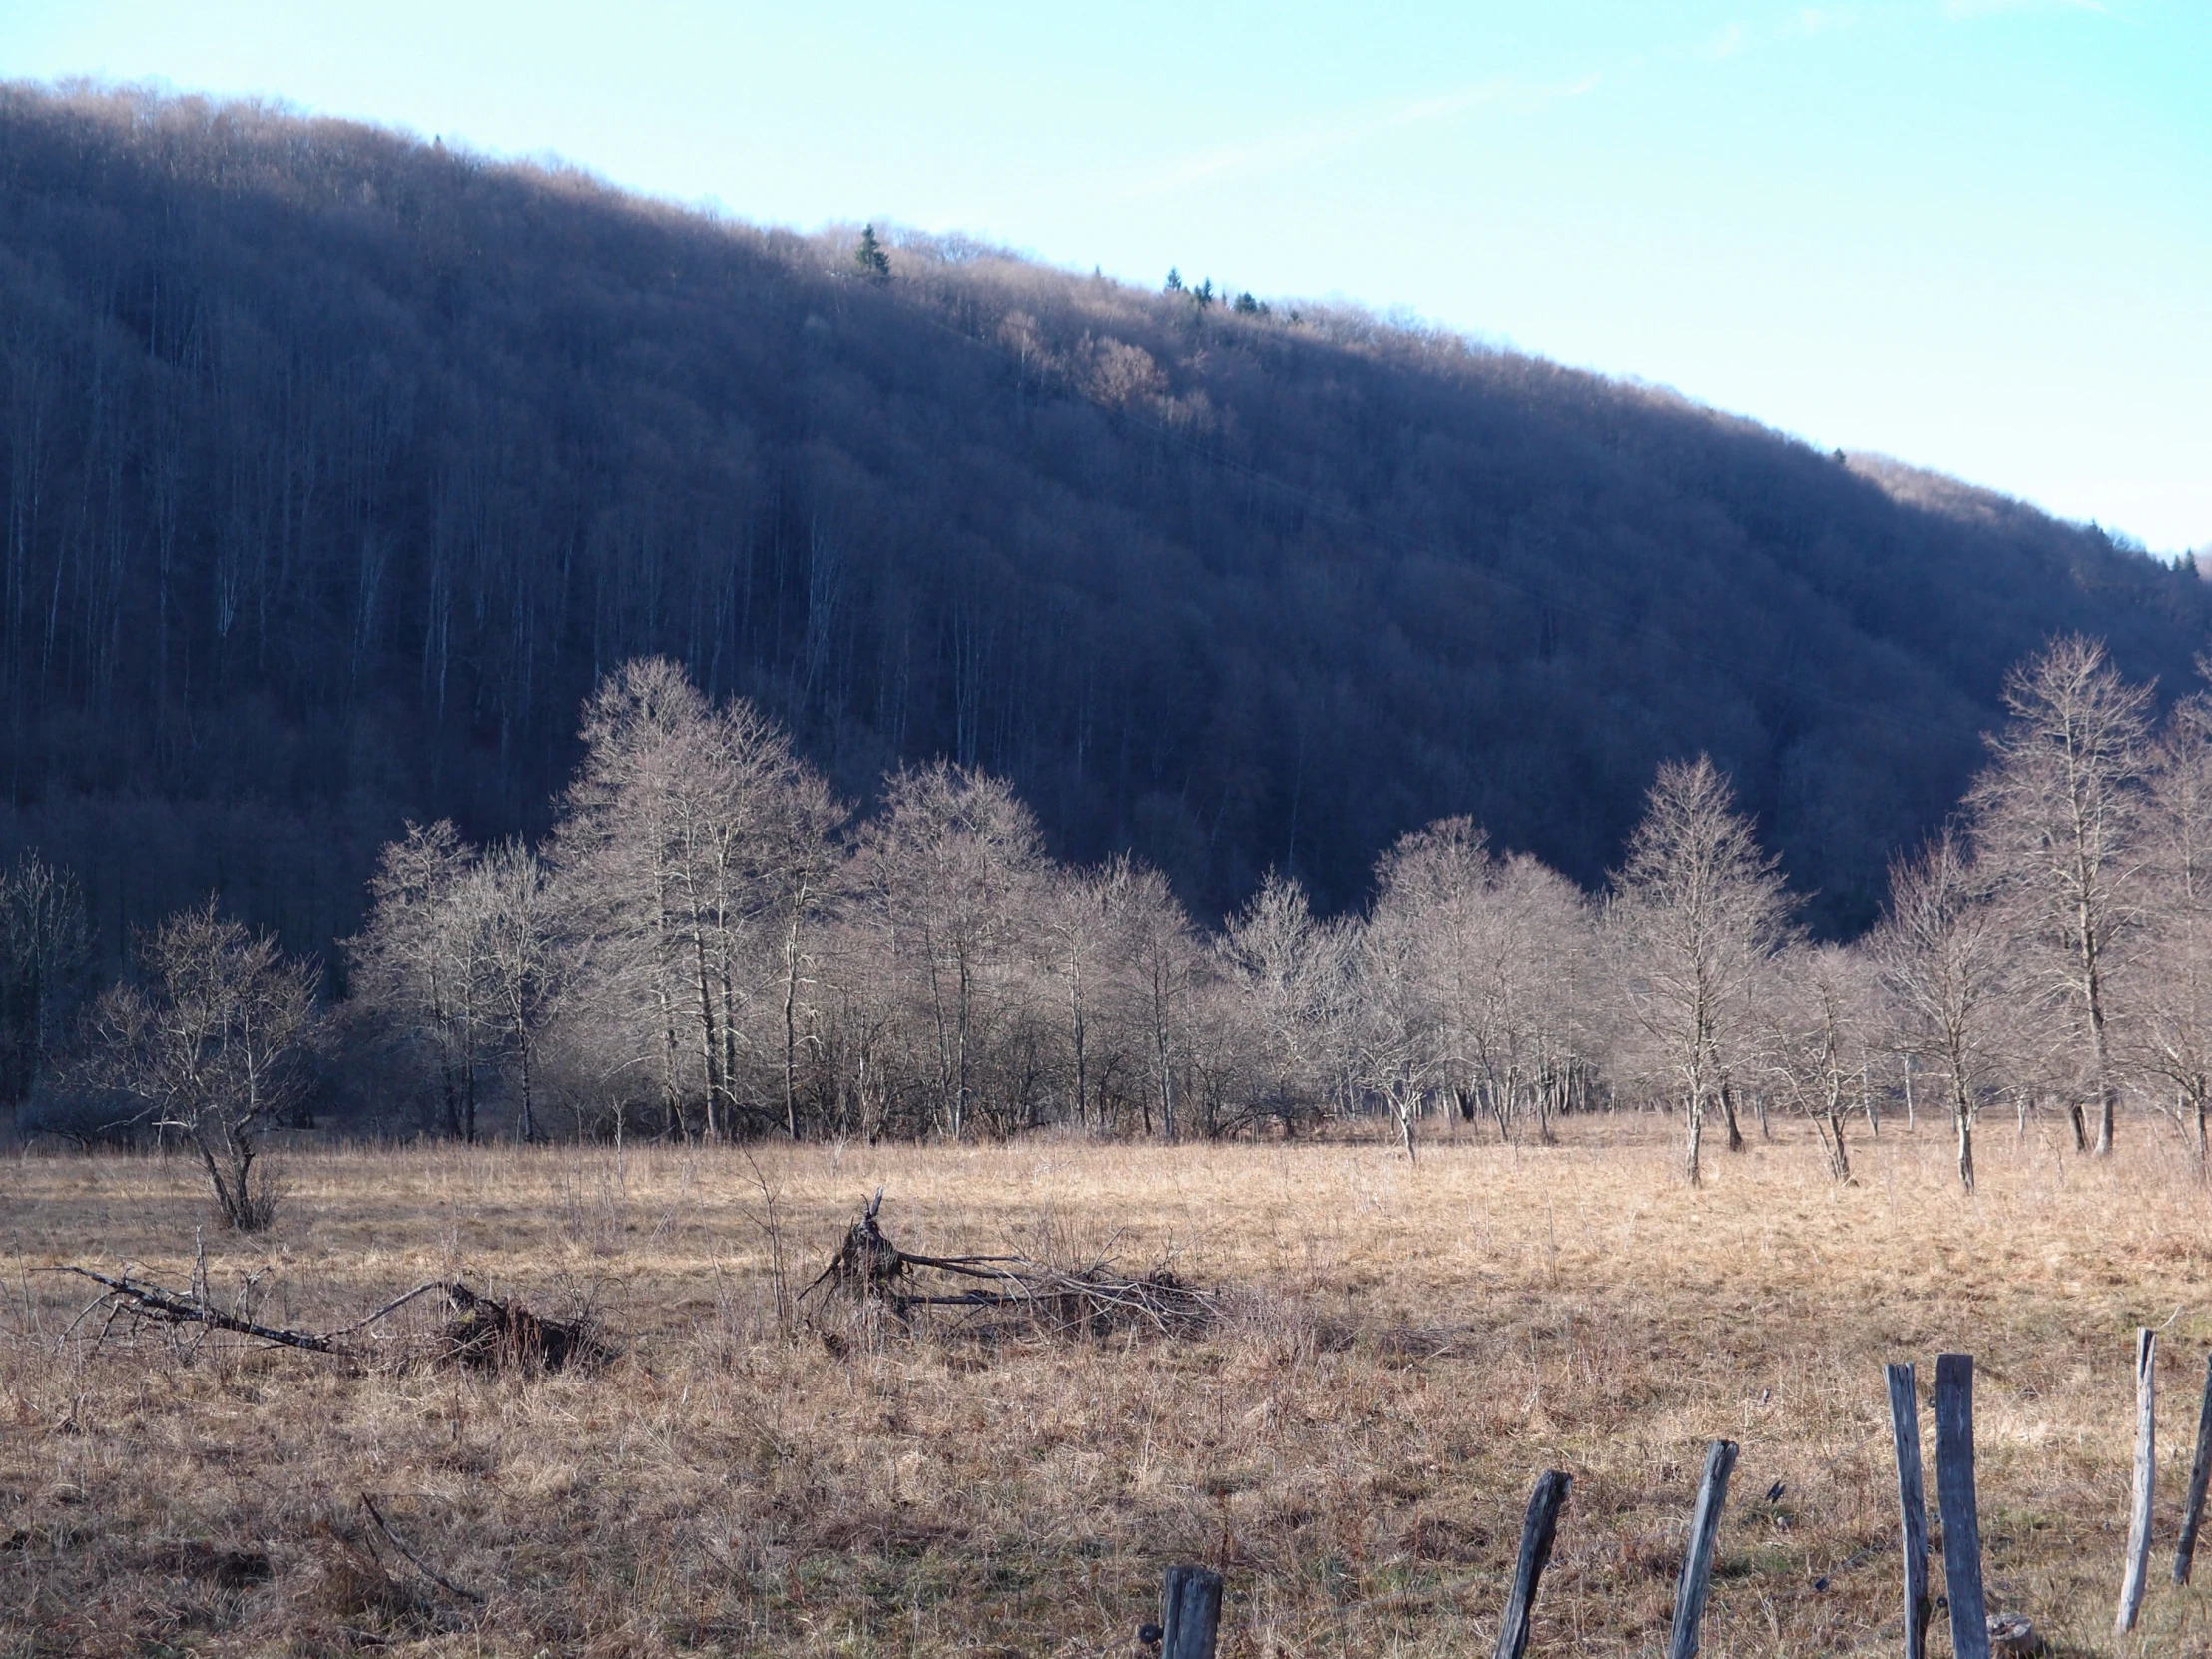 the trees near the fence look barren but the hillside can be seen beyond the wood